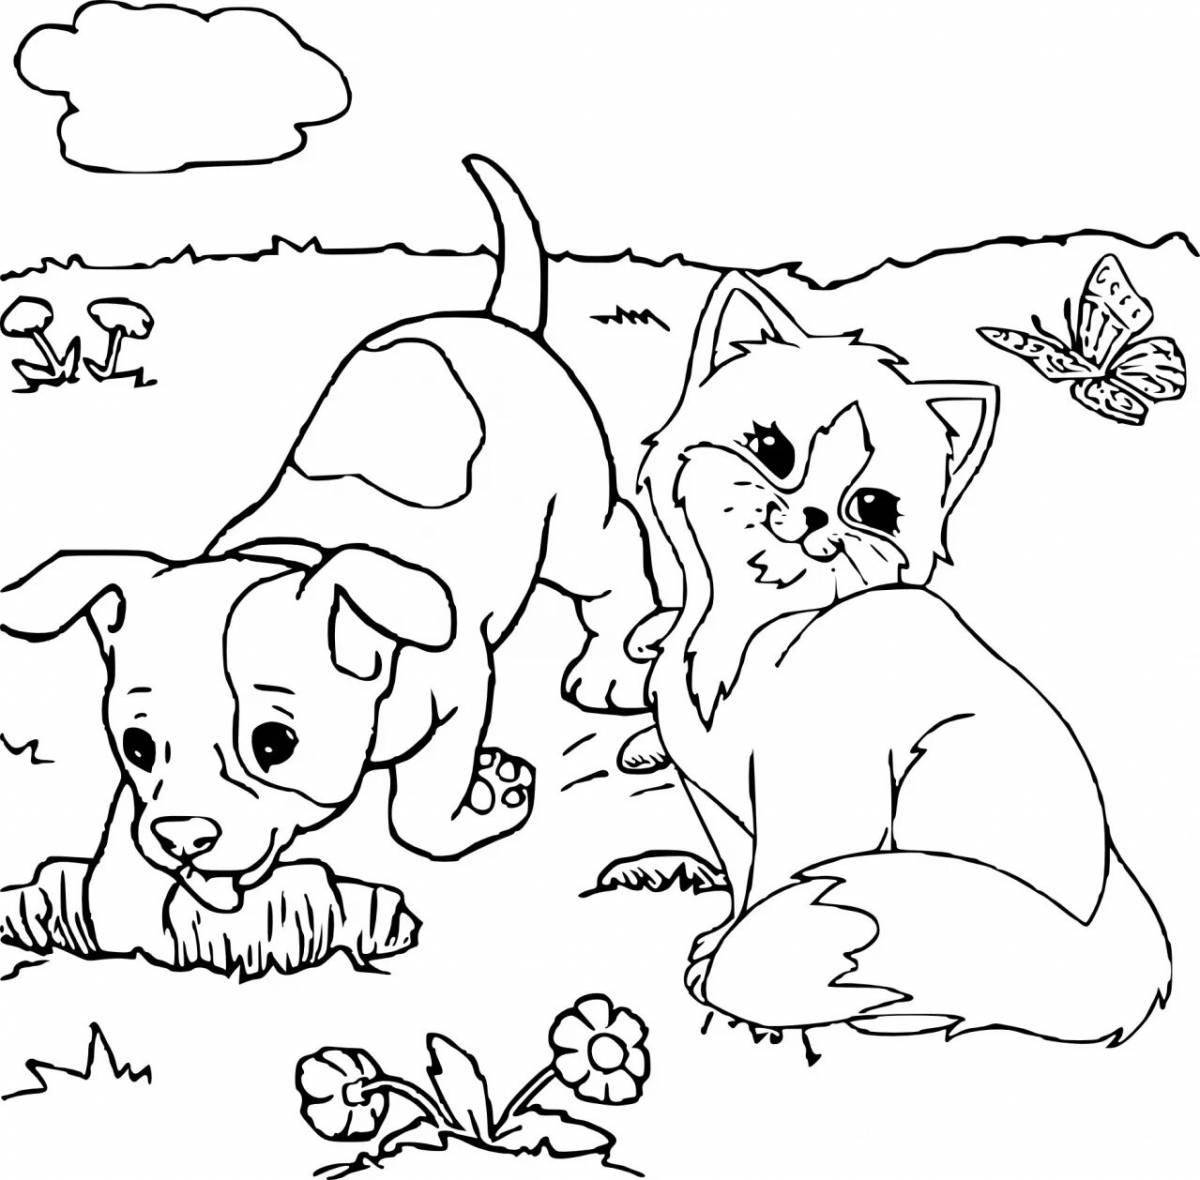 Humorous coloring book pets for children 5-6 years old